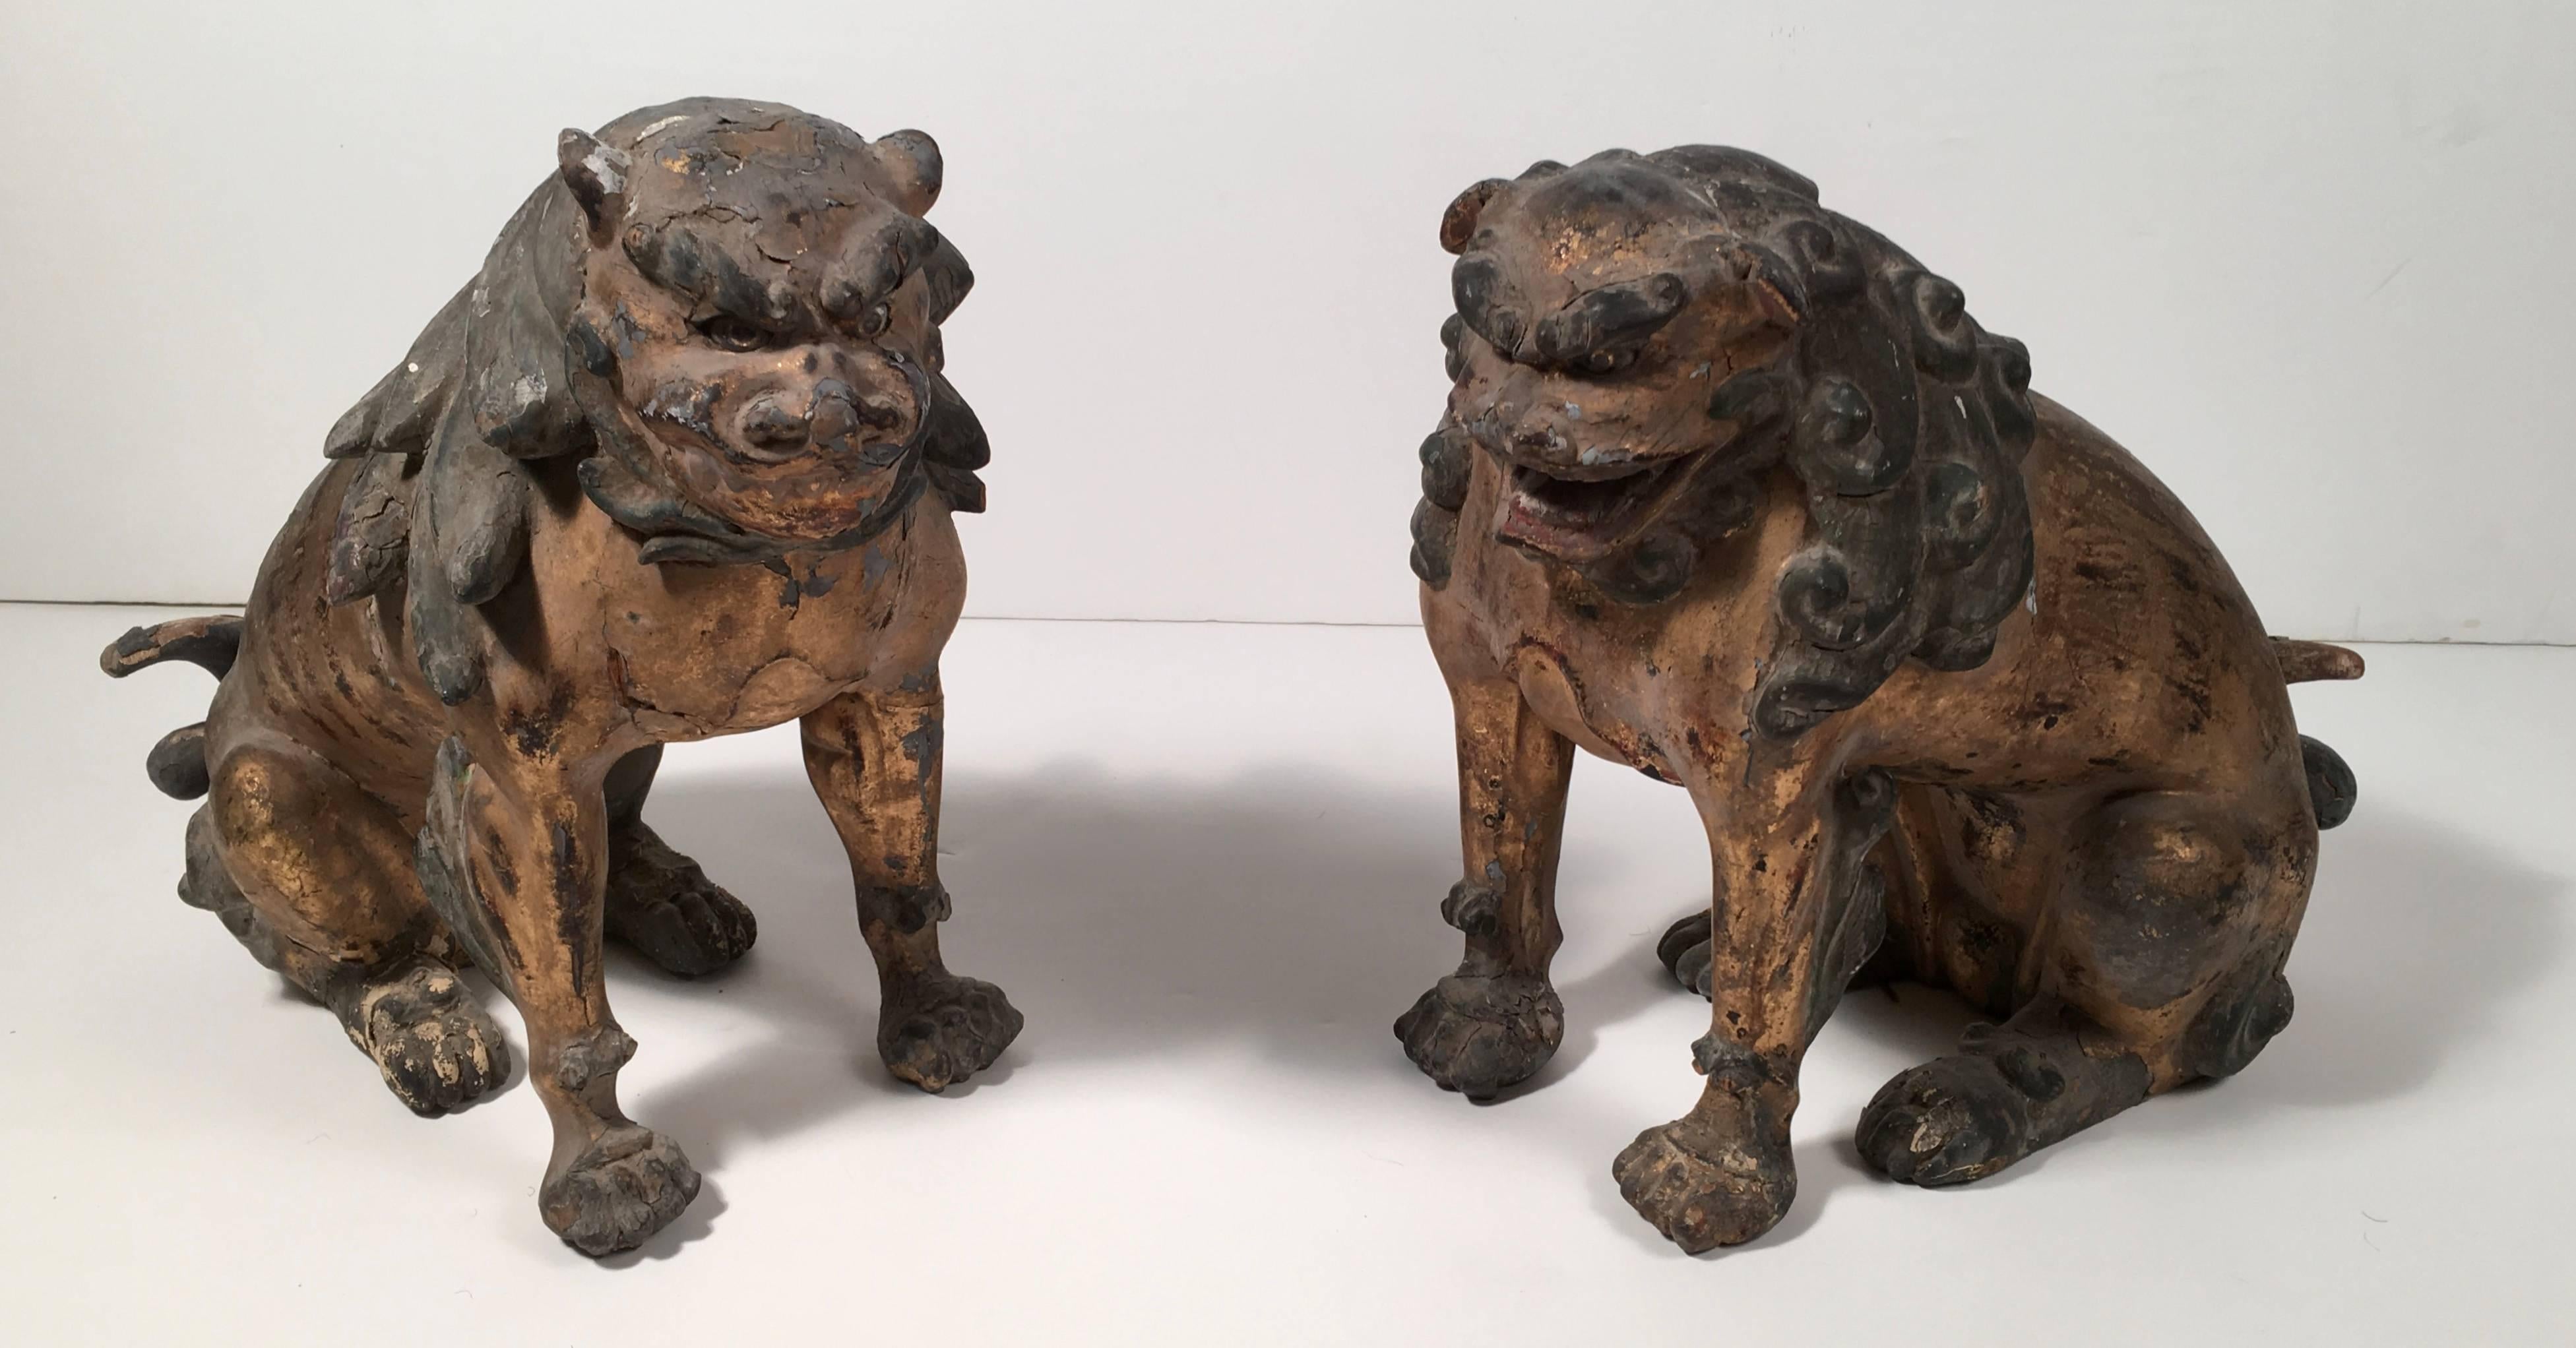 A pair of Japanese Shinto guardian lion dogs, called